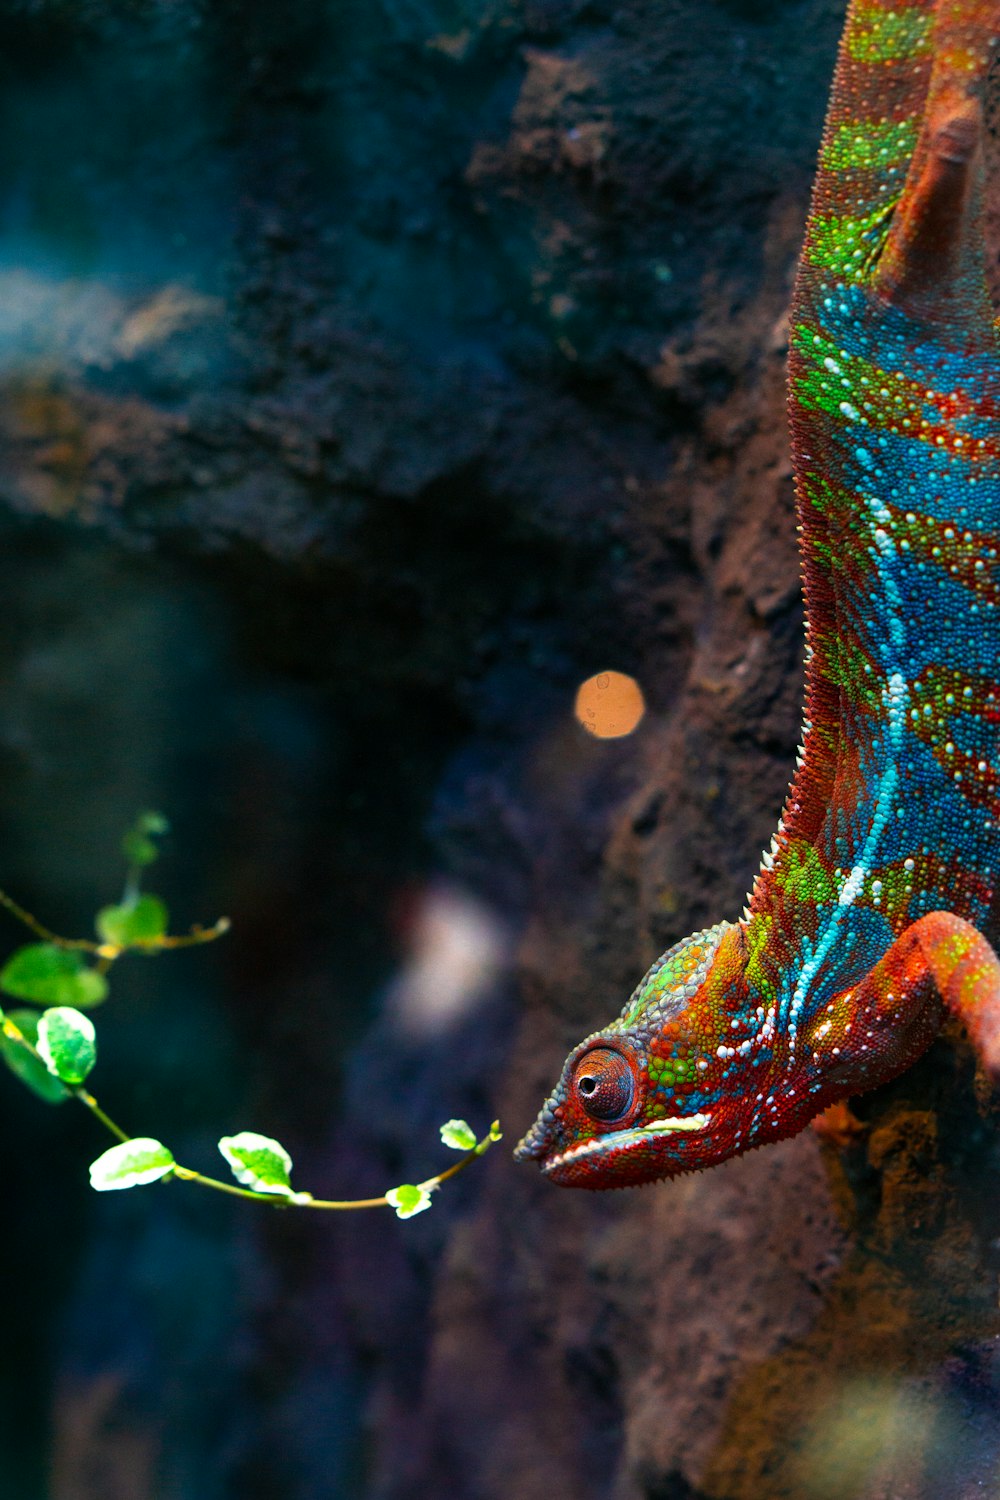 a colorful lizard hanging from a tree branch